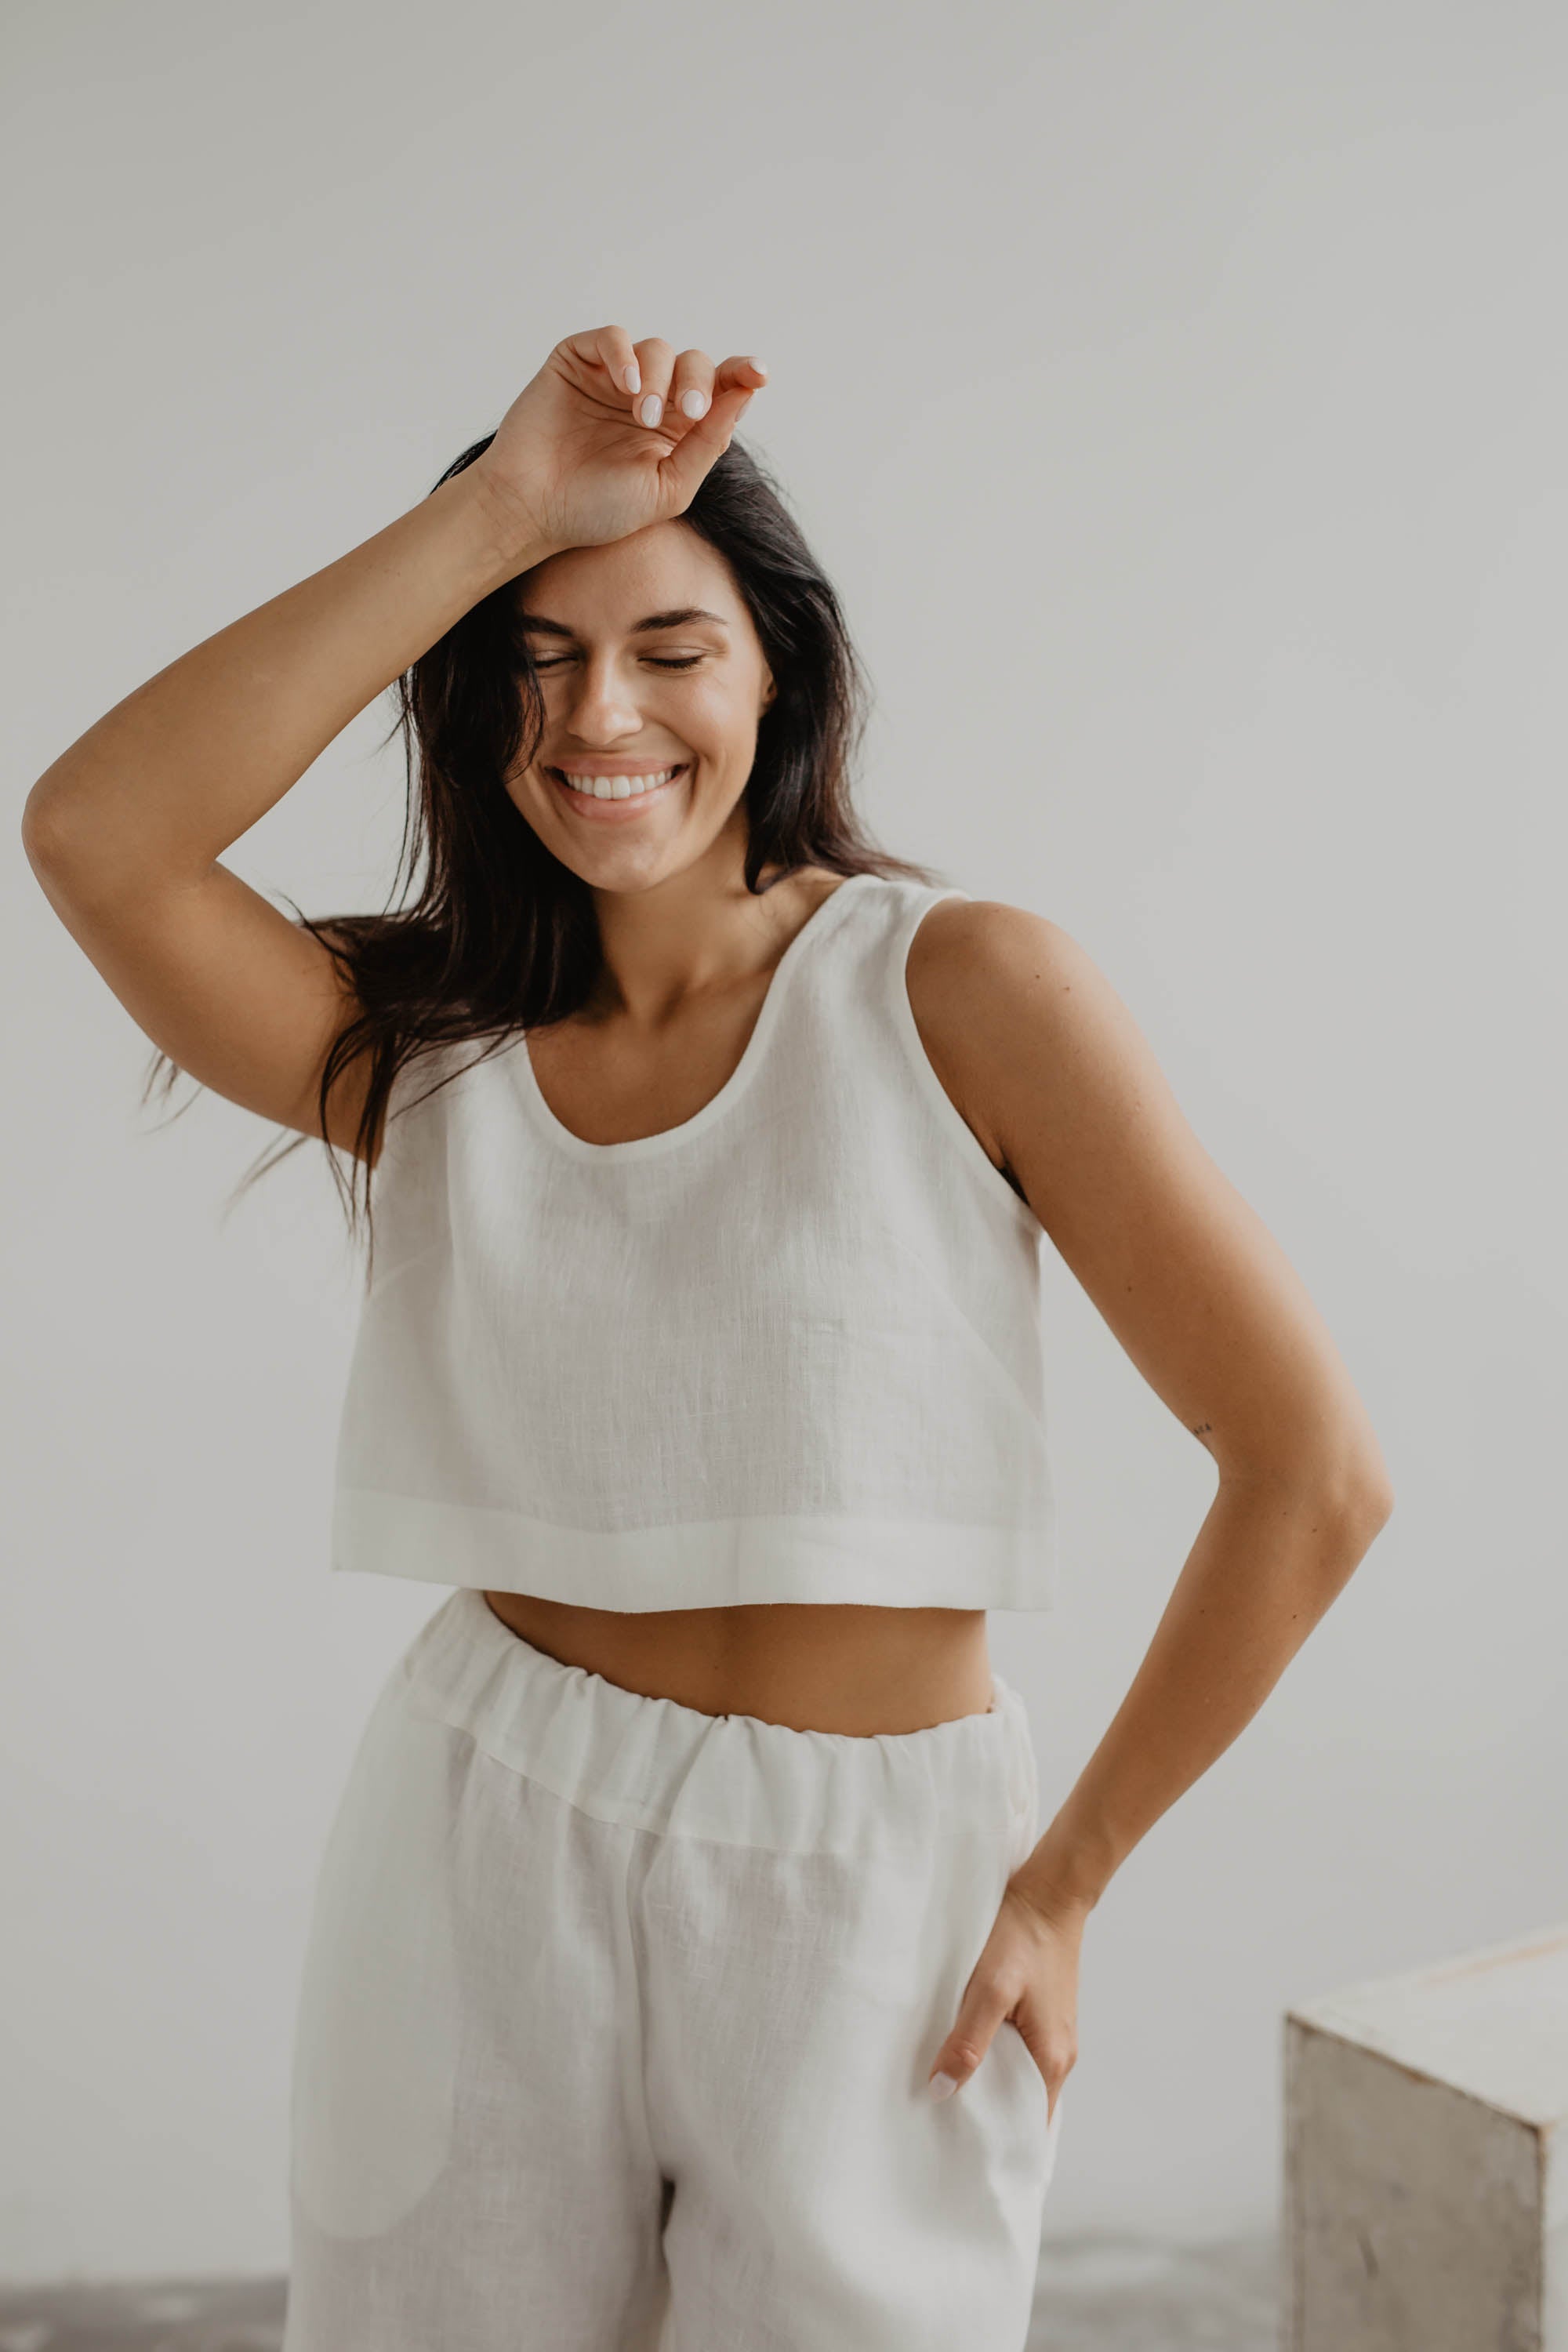 Woman Wearing A White Linen Crop Top With White Linen Shorts Posing In Gallery